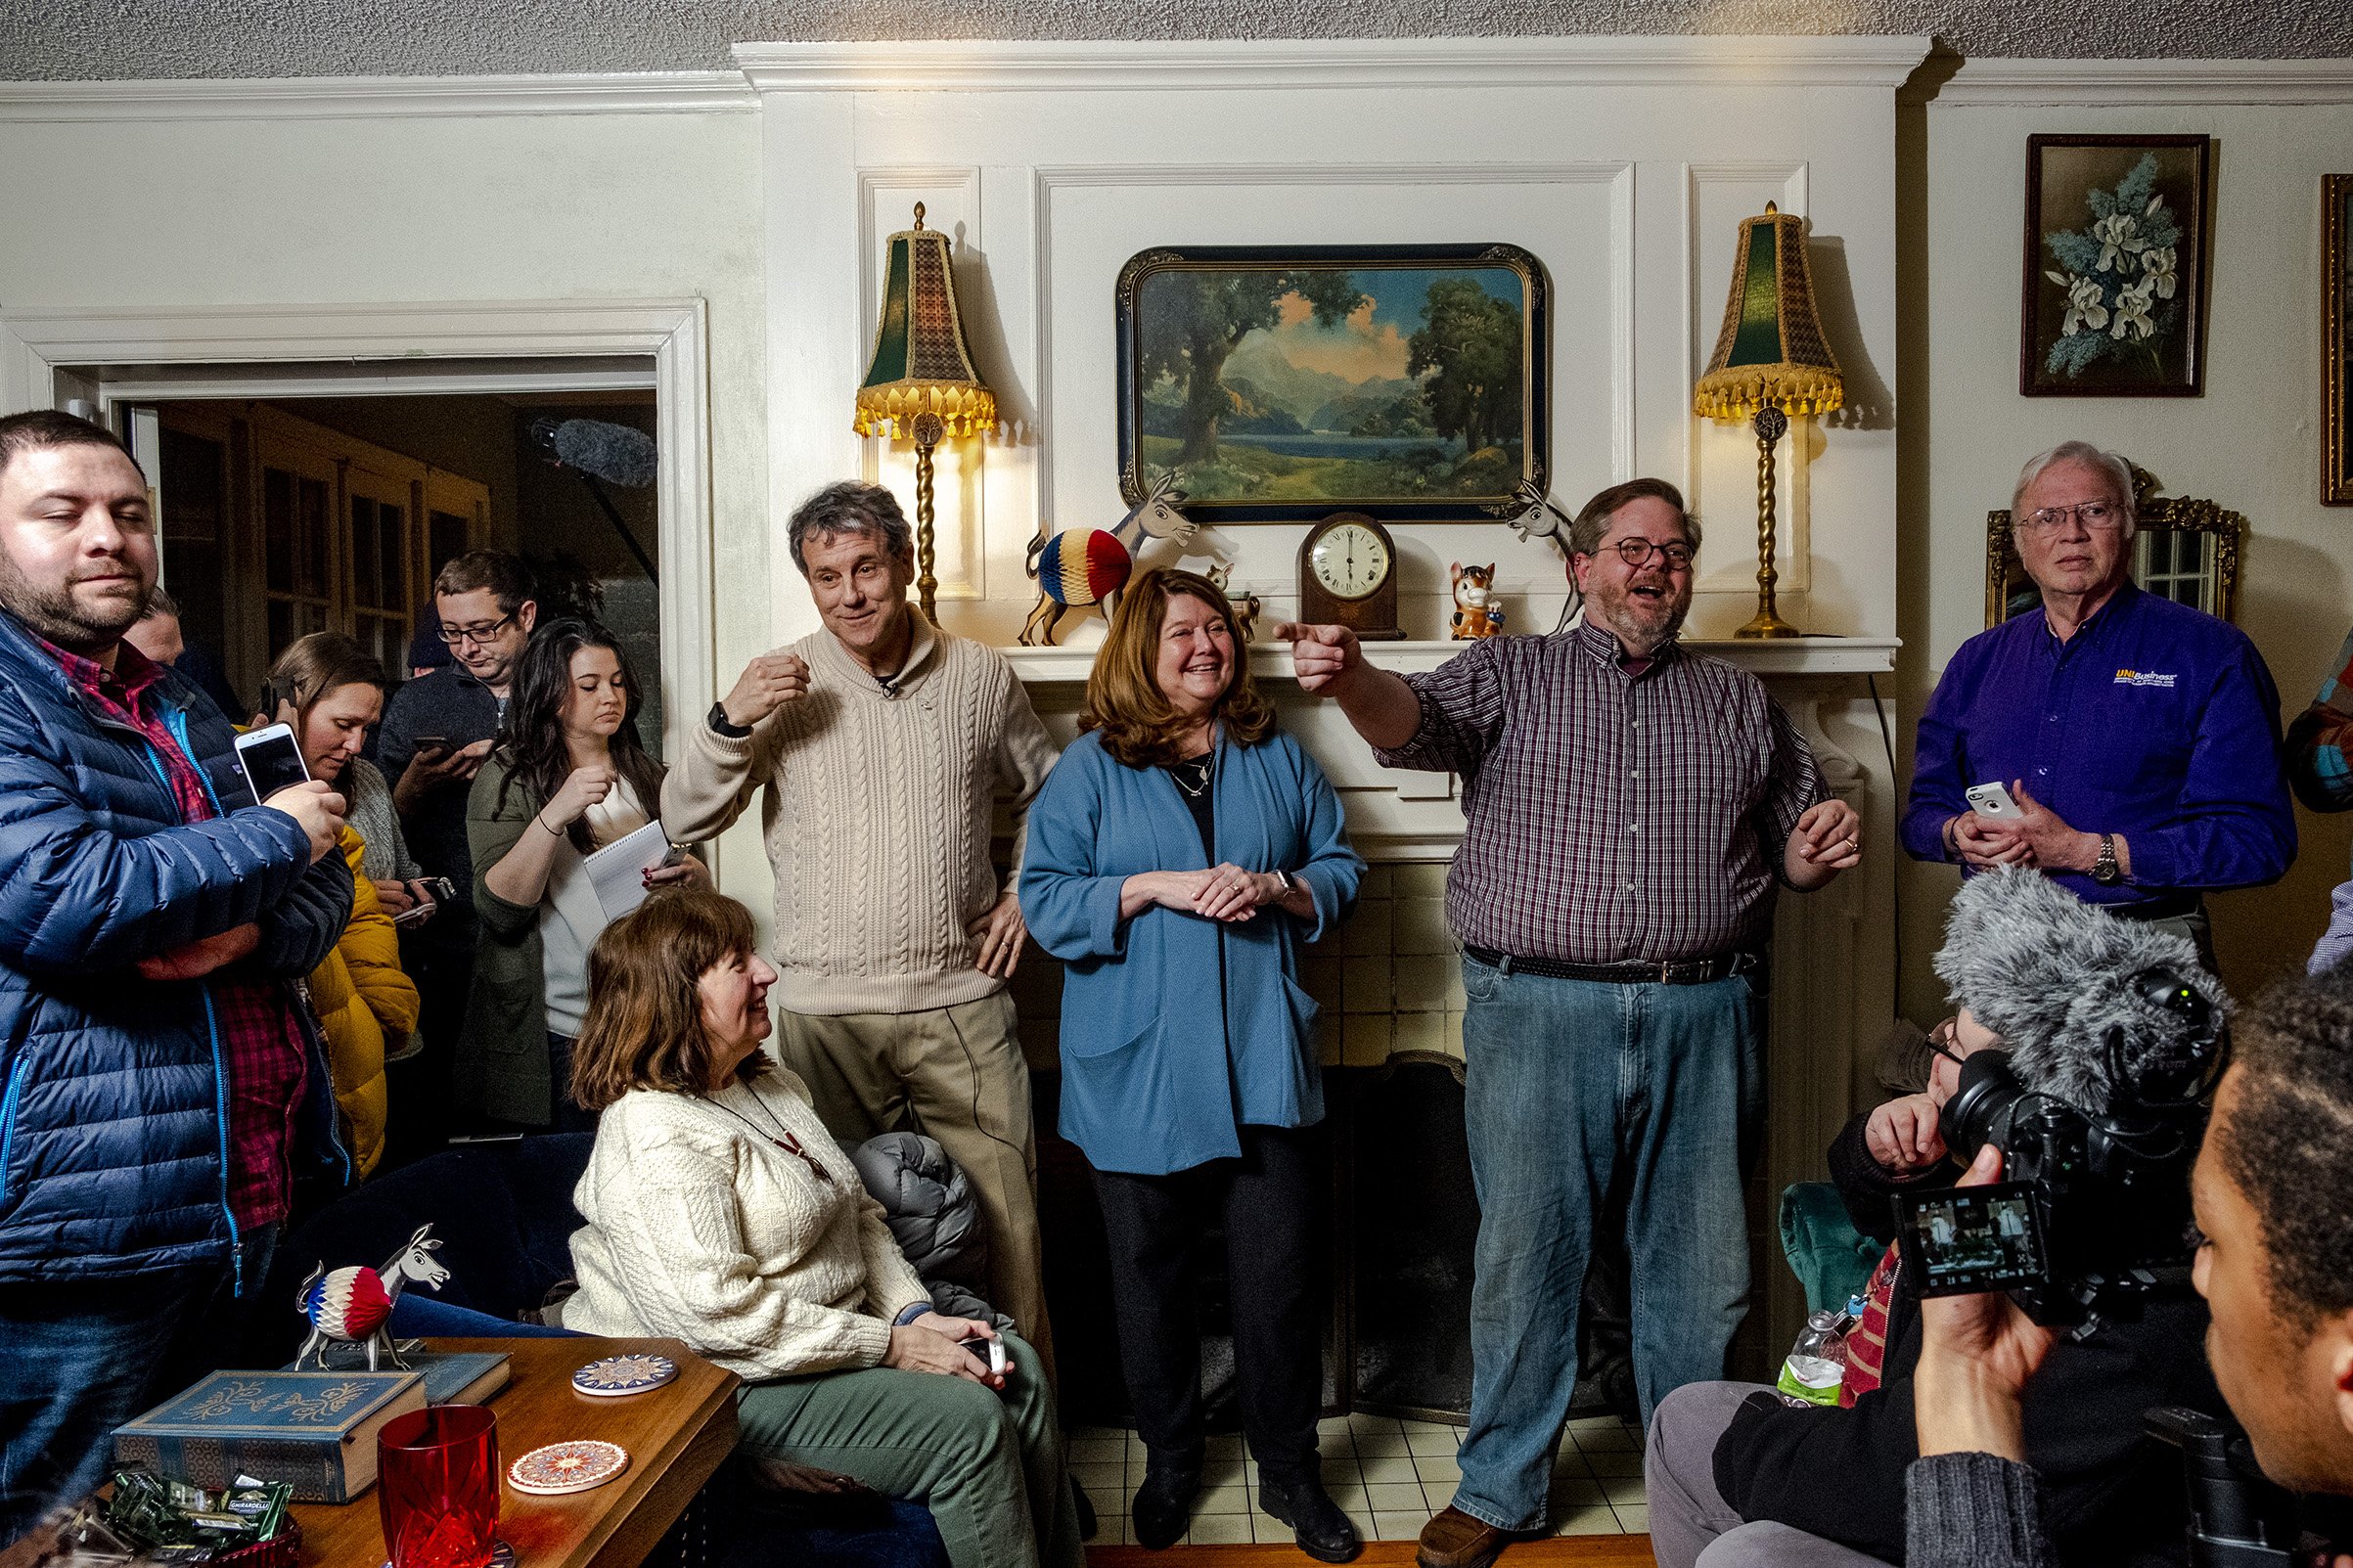 Sen. Brown and his wife Connie Schultz attend a meet and greet at the home of the Black Hawk County Supervisor Chris Schwartz, in Waterloo, IA on Feb. 2, 2019. (Devin Yalkin for TIME)